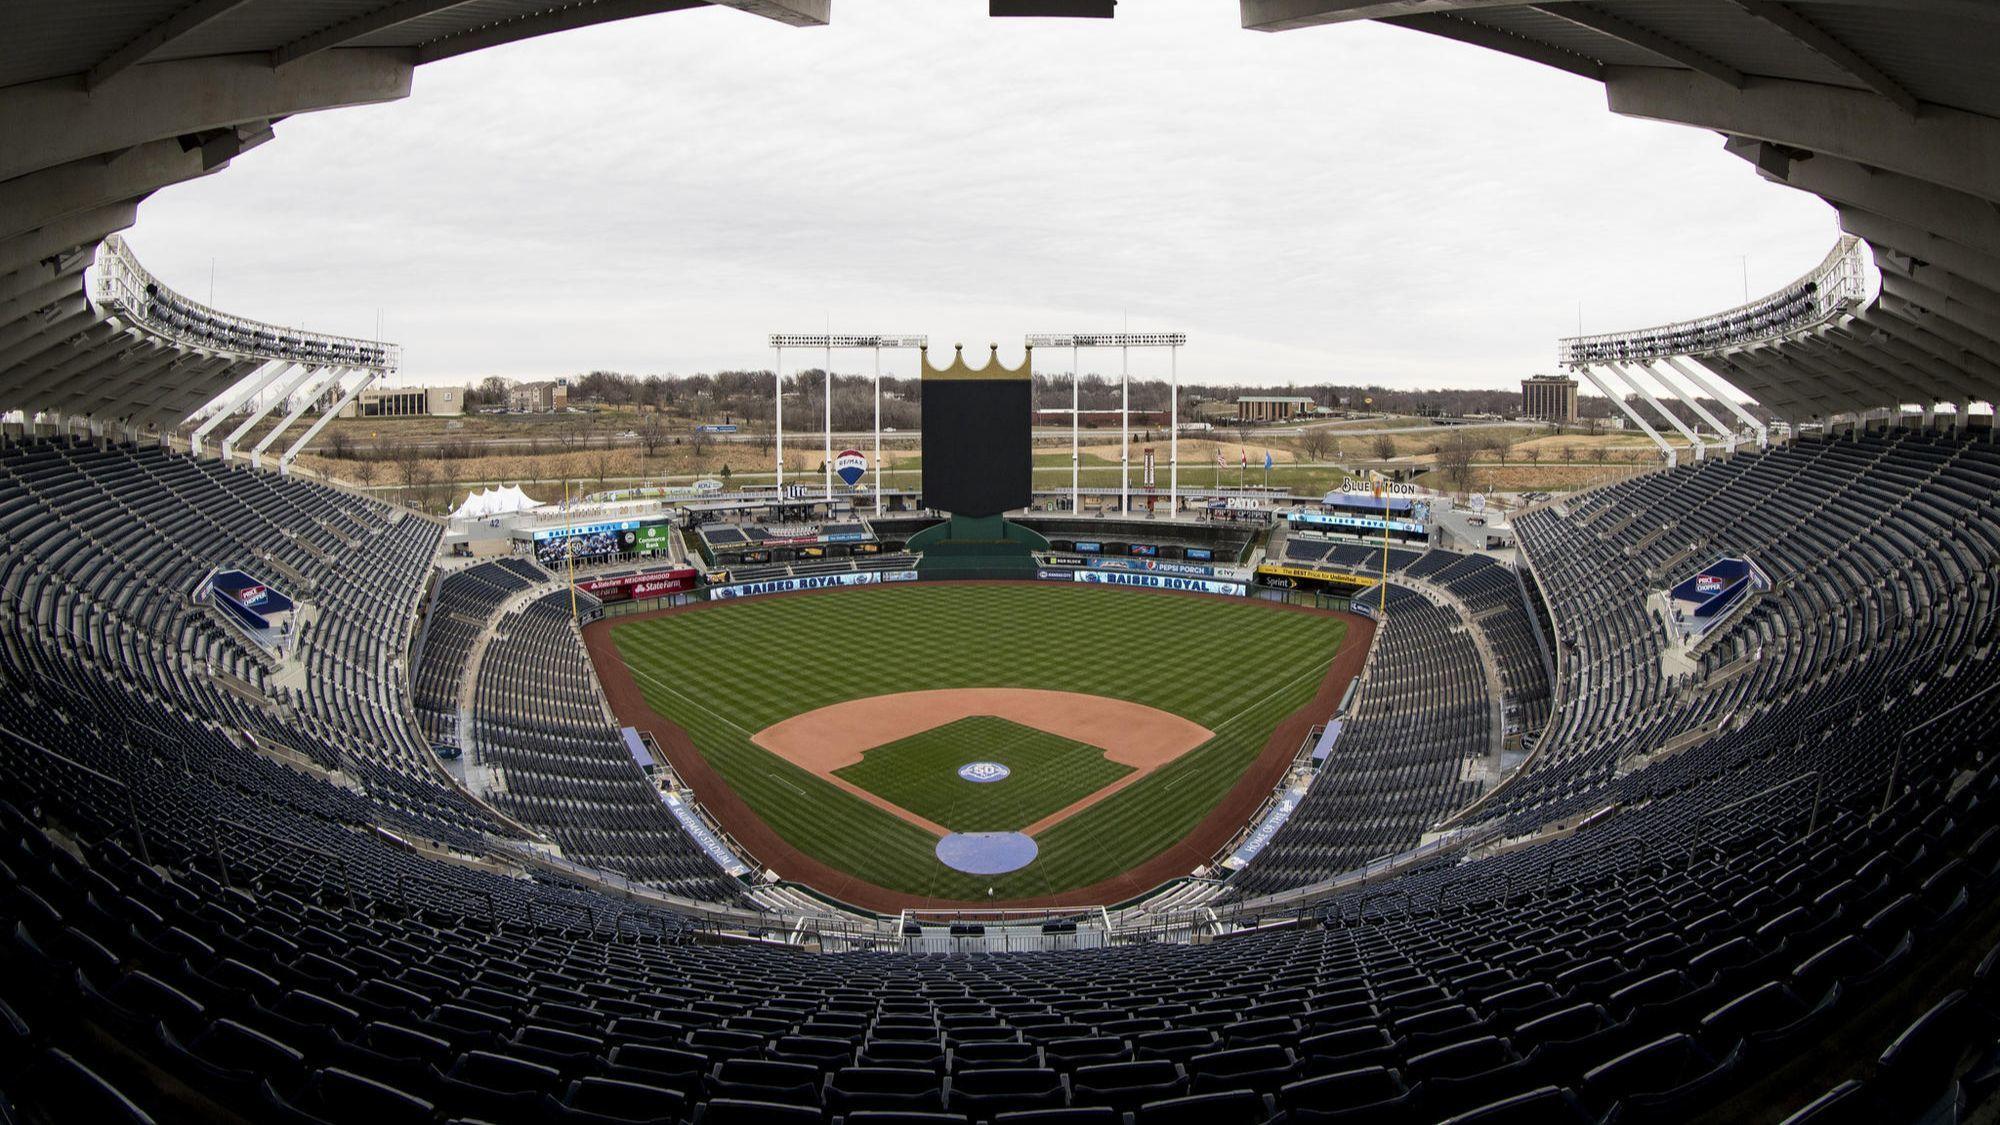 White Sox-Royals game postponed due to cold weather